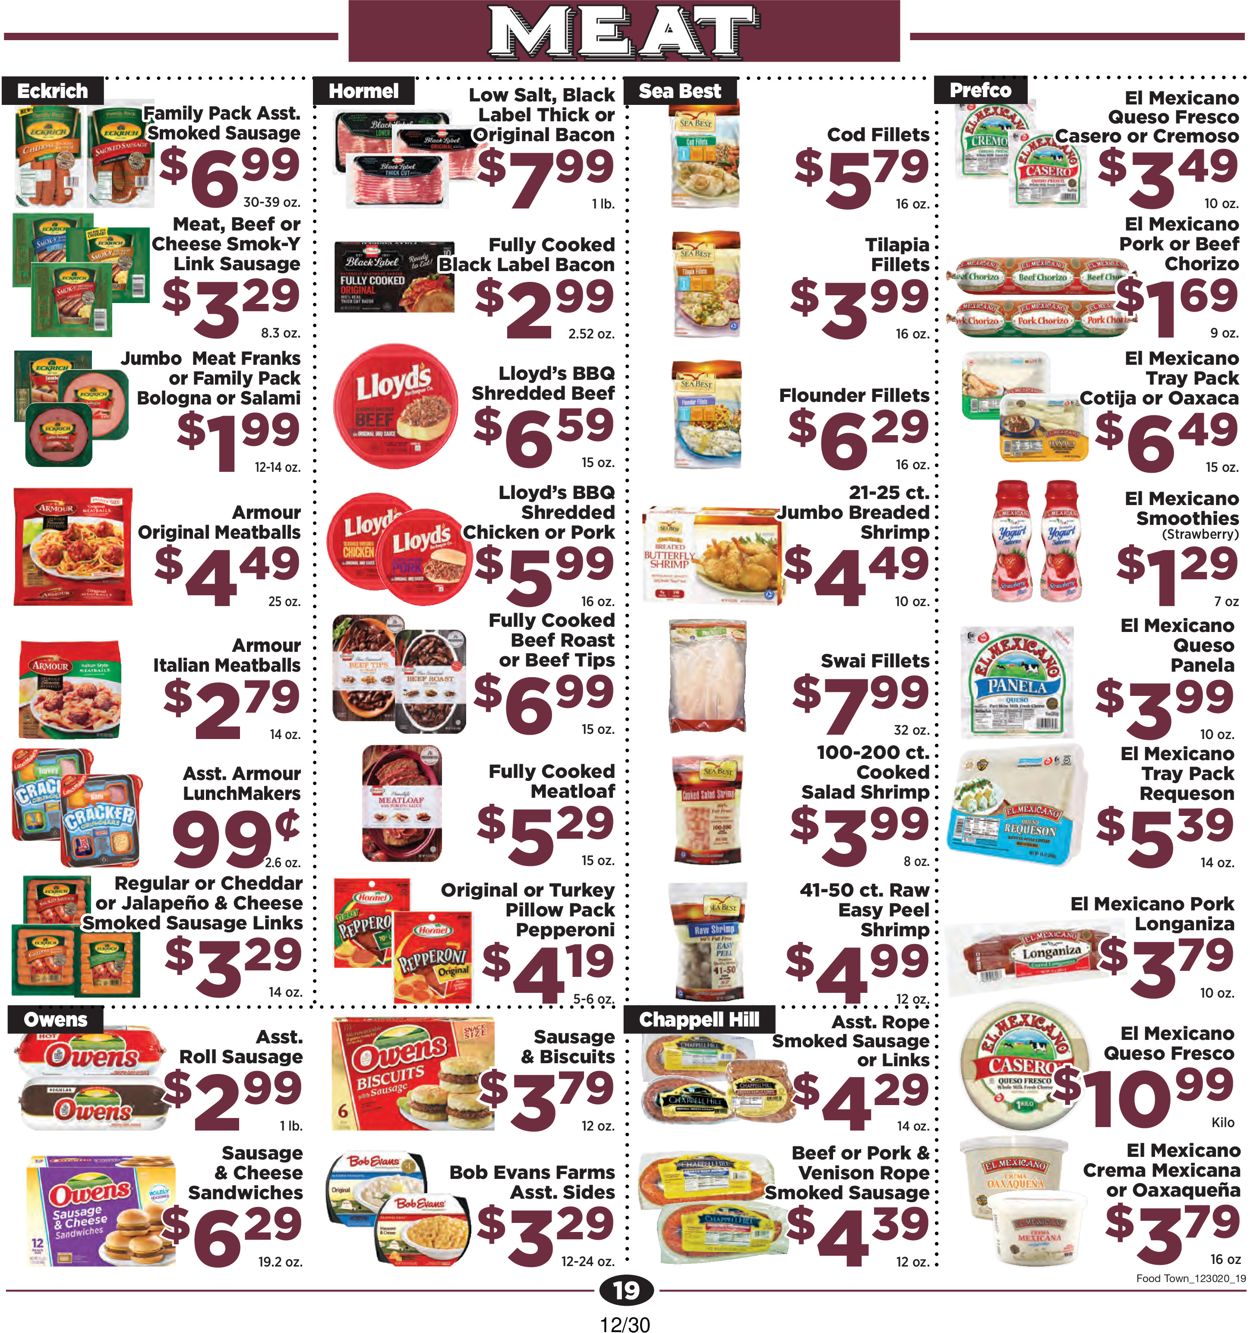 Food Town Specials & Grocery Ad Weekly Ad Circular - valid 12/30-01/05/2021 (Page 19)